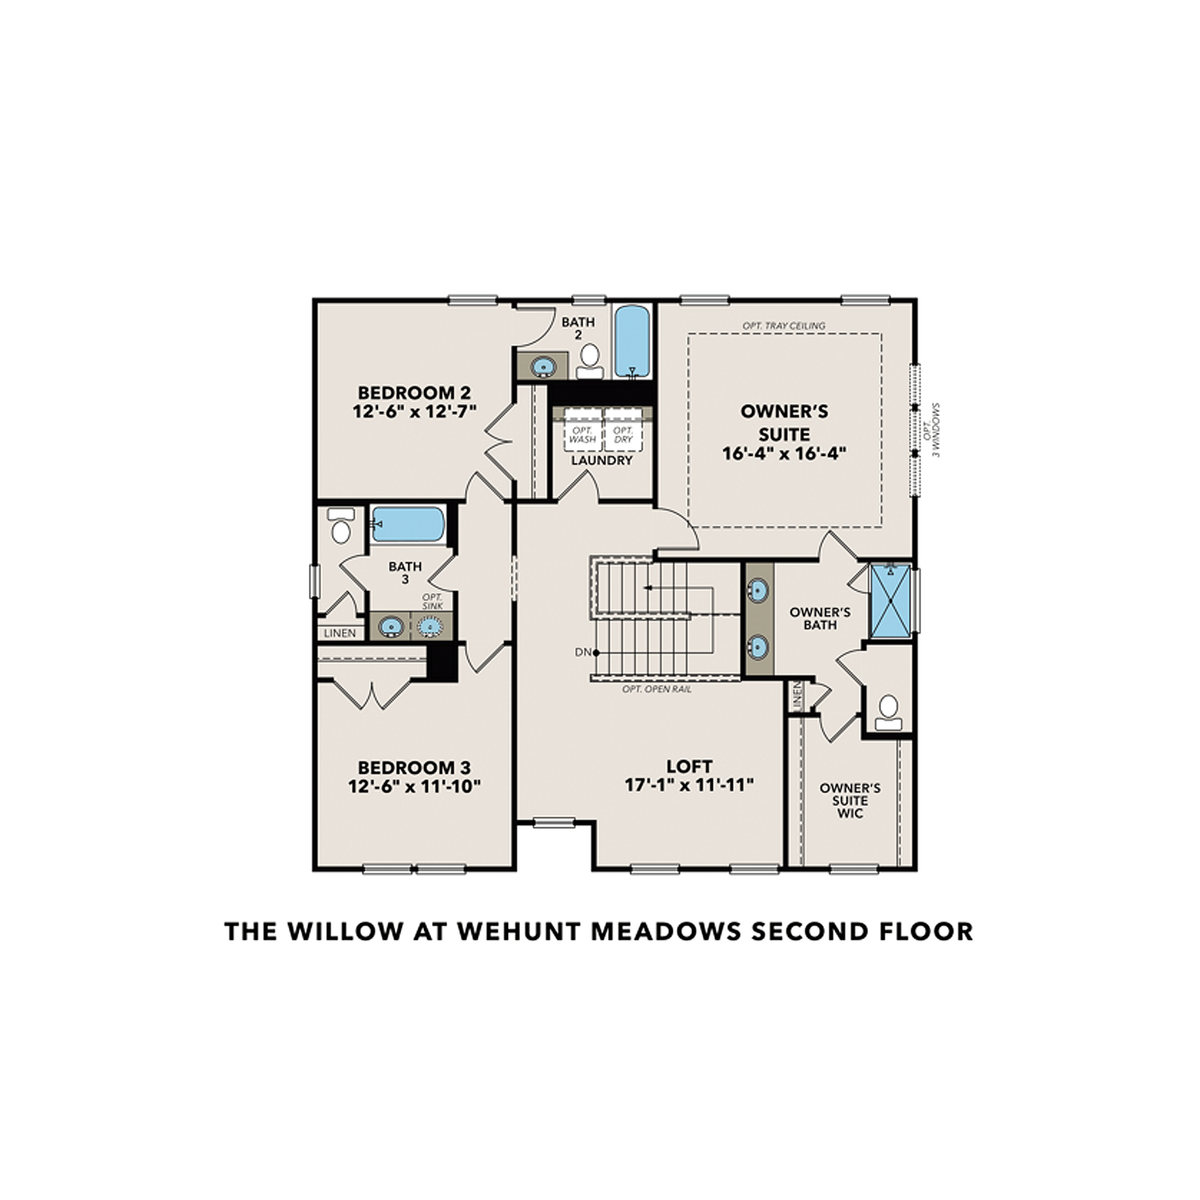 2 - The Willow B at Wehunt Meadows  buildable floor plan layout in Davidson Homes' Wehunt Meadows community.